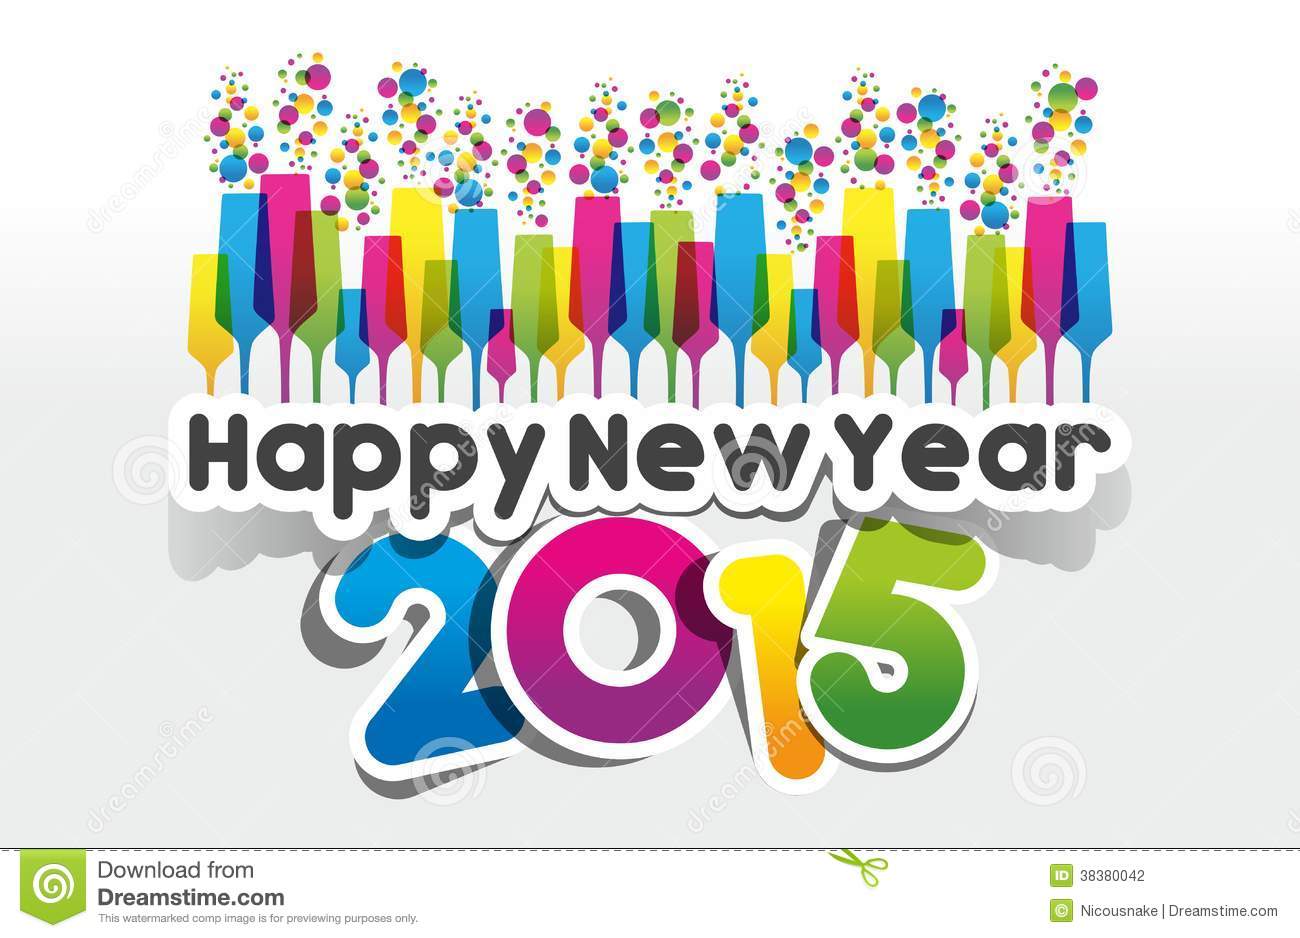 Happy New Year Greetings Wide Wallpaper Puter